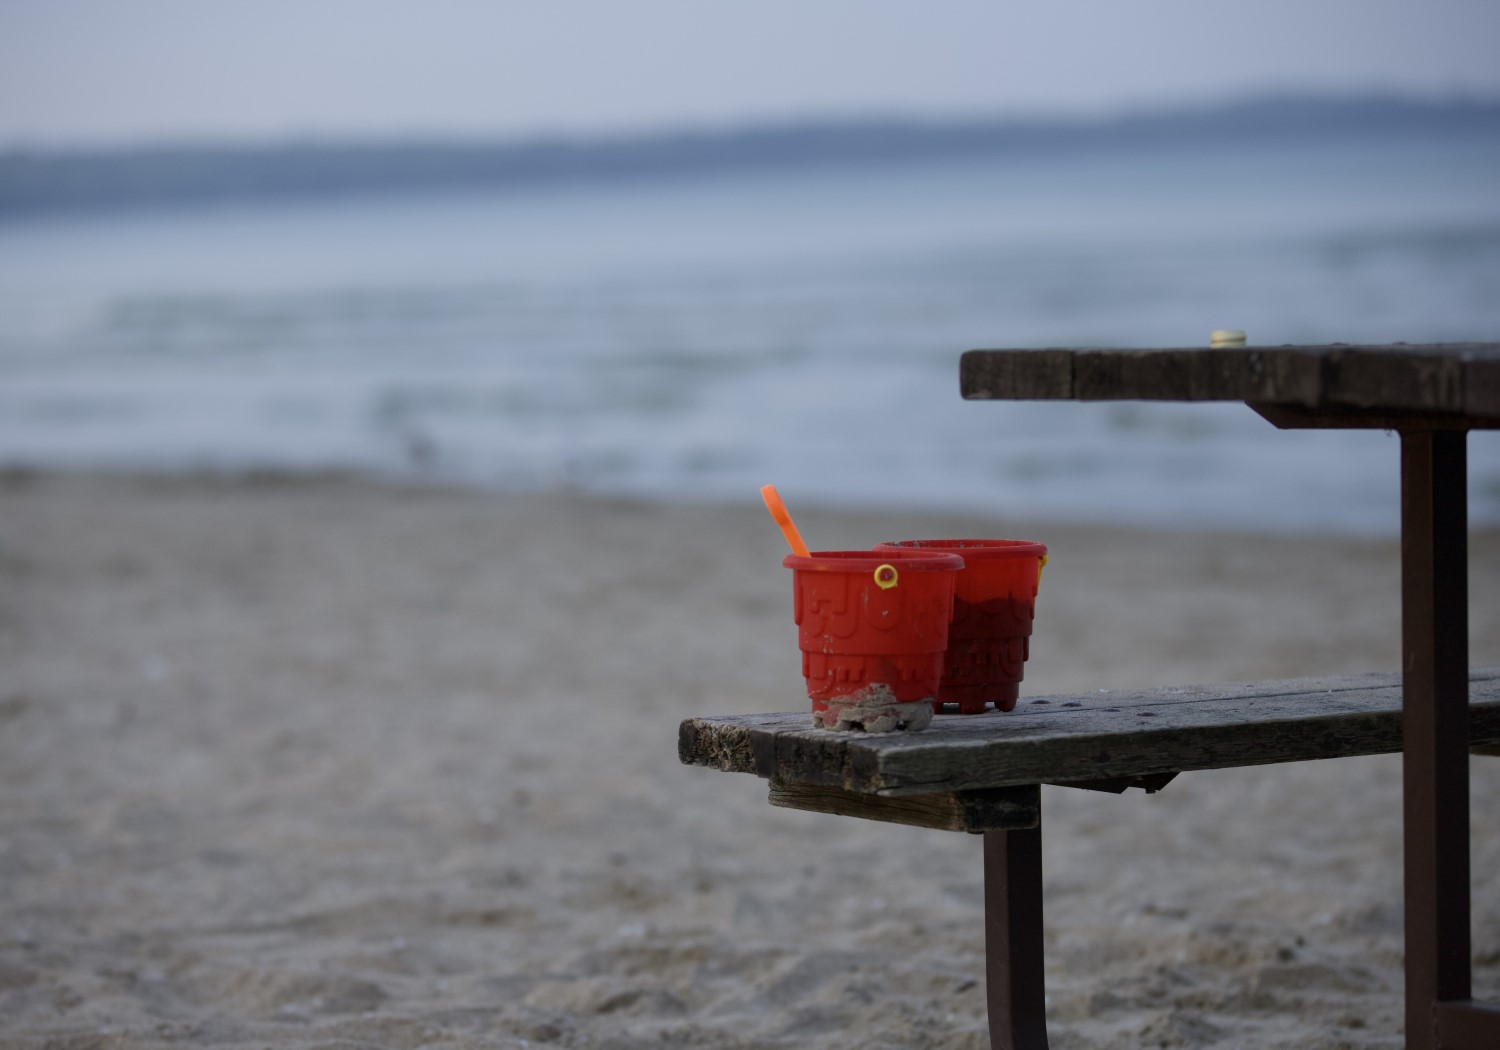 Two red sand buckets, children's beach toys, sitting on a wooden picnic table on a beach